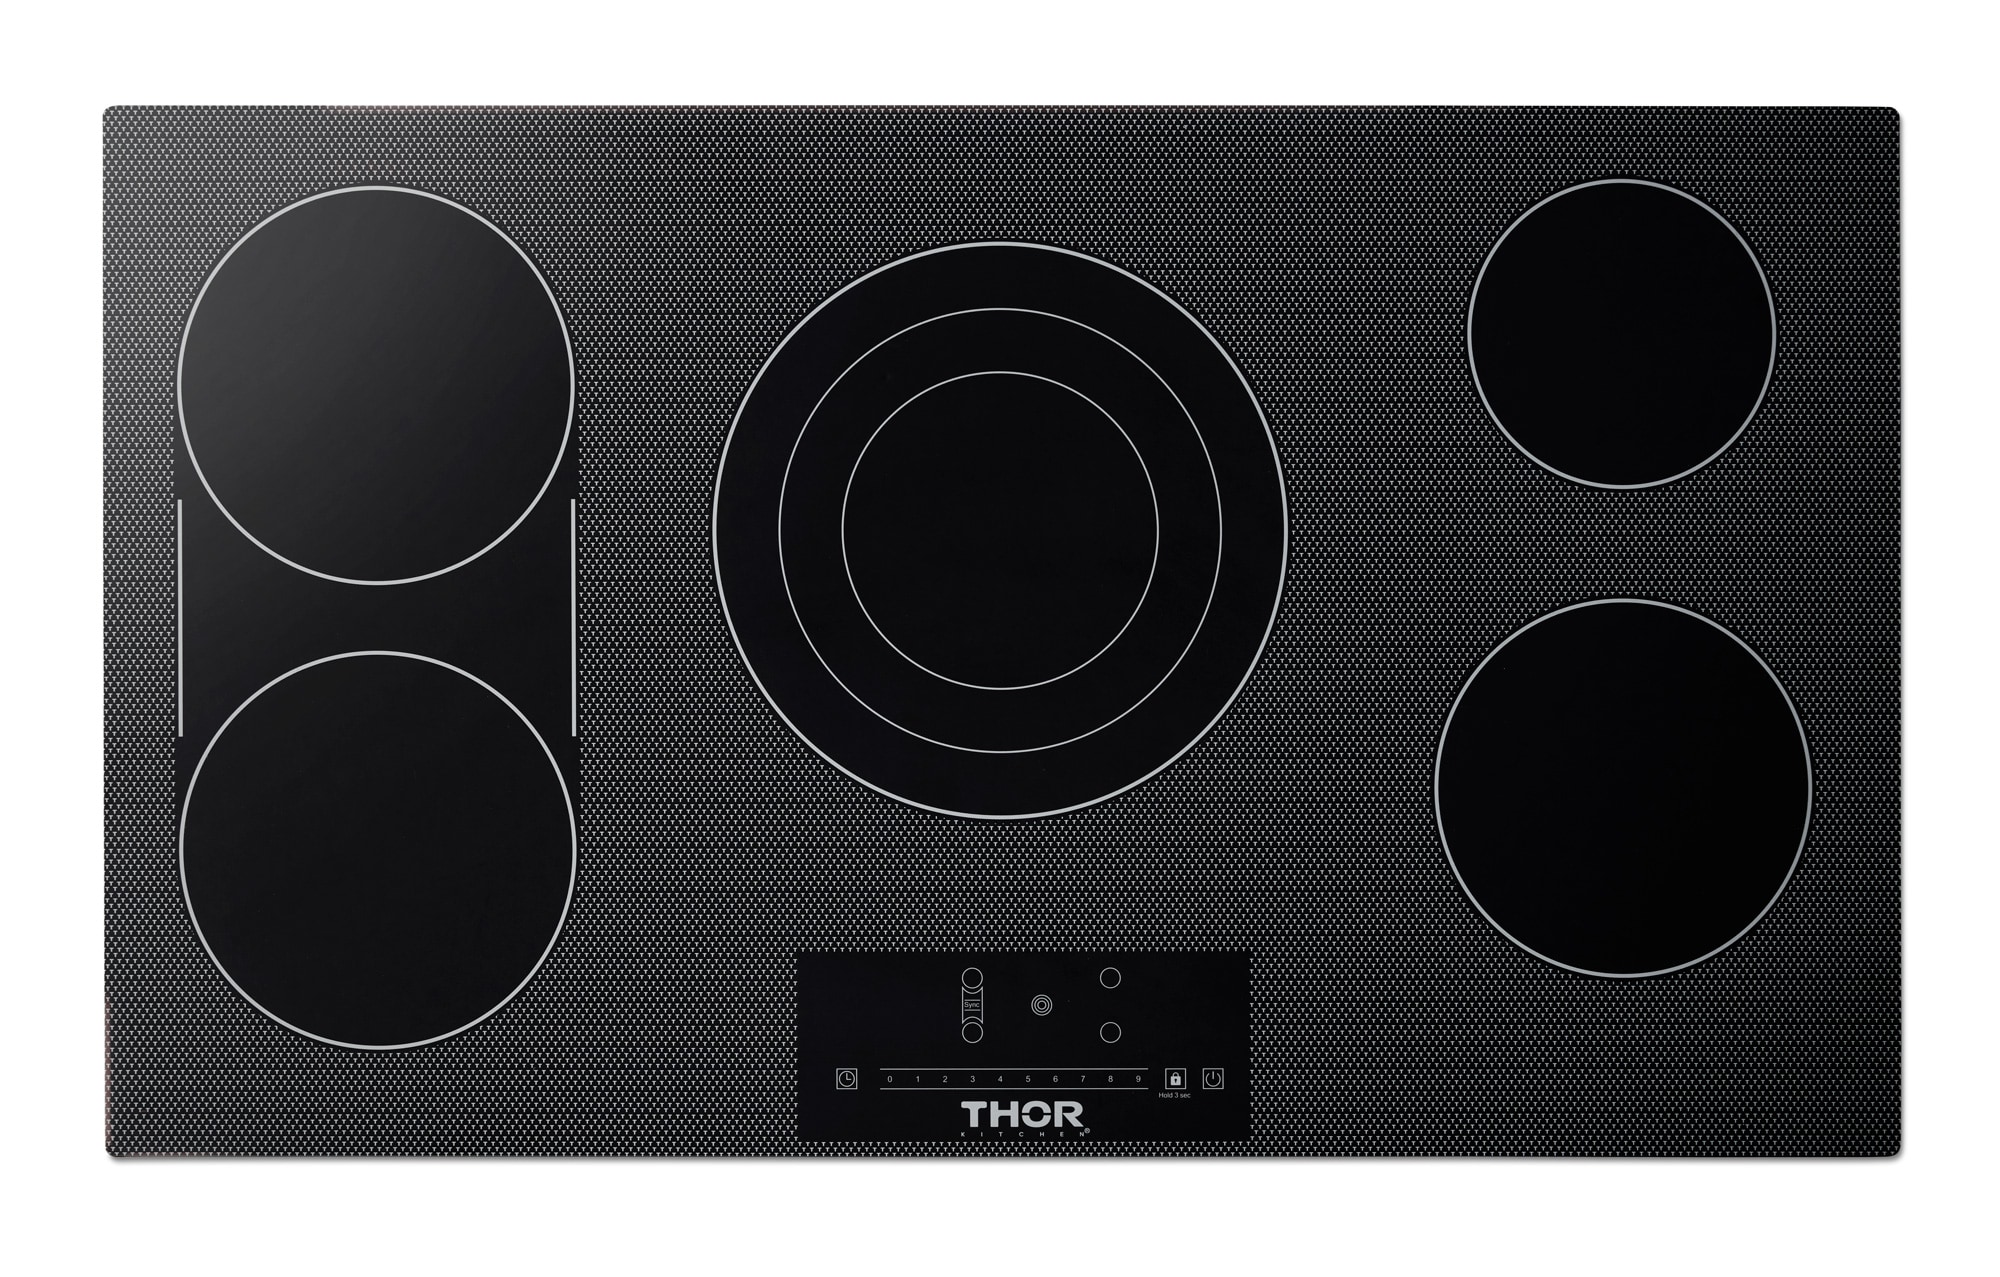 Bosch NET8669SUC 36 800 Series Electric Cooktop in Black Surface Mo